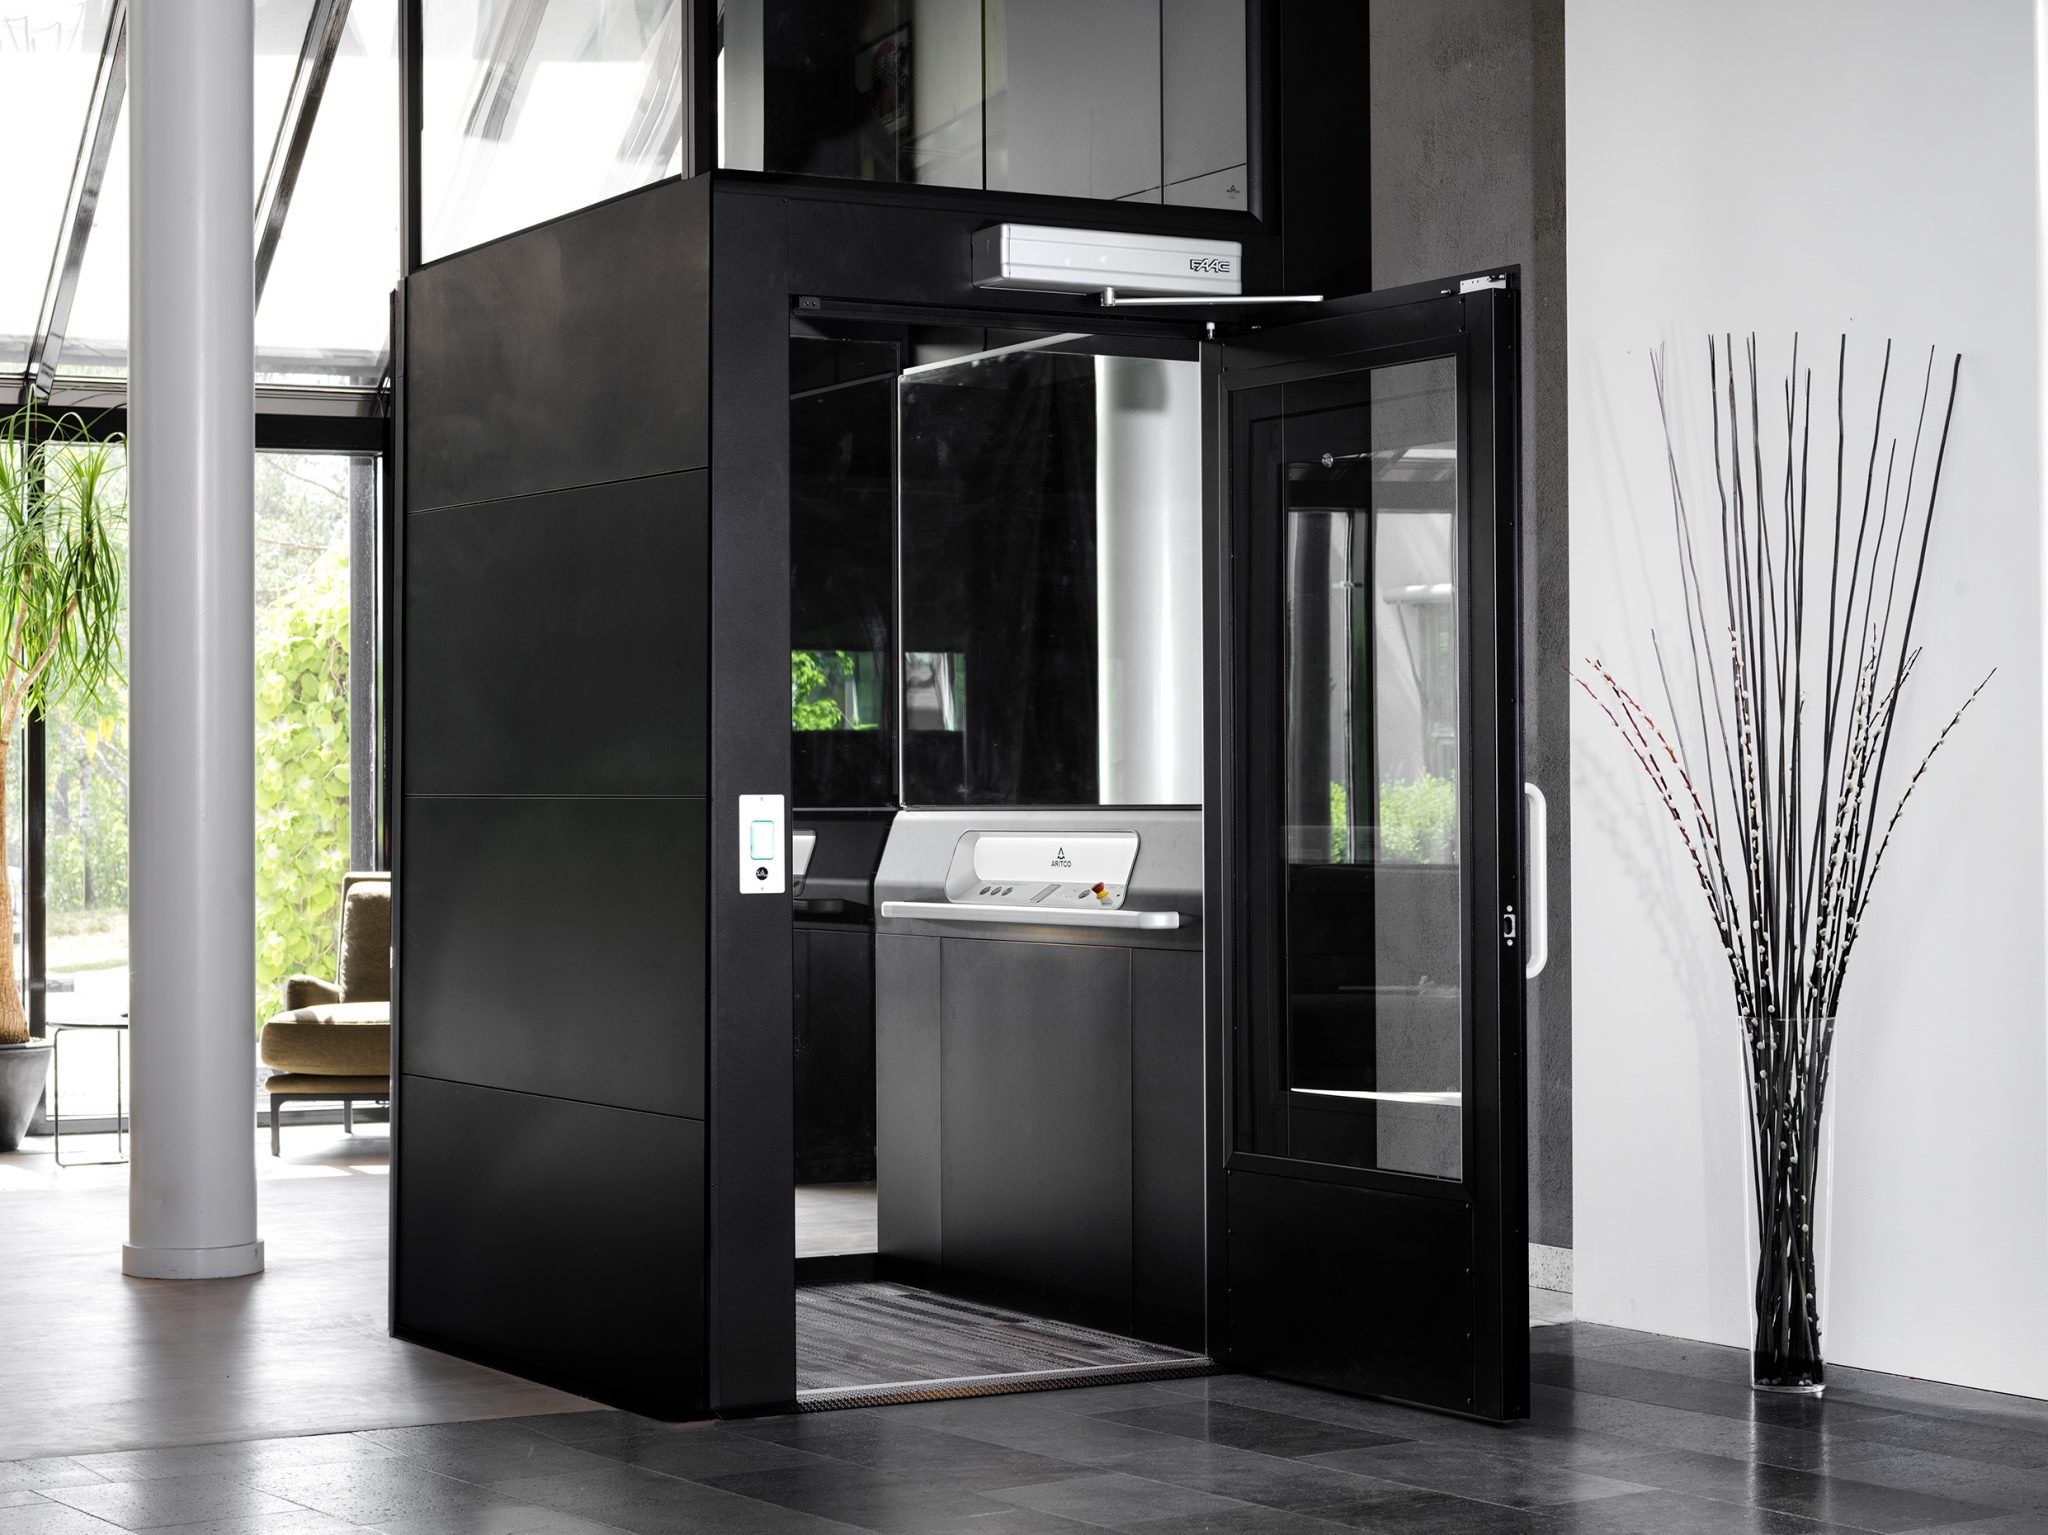 The home lift Aritco HomeLift Access